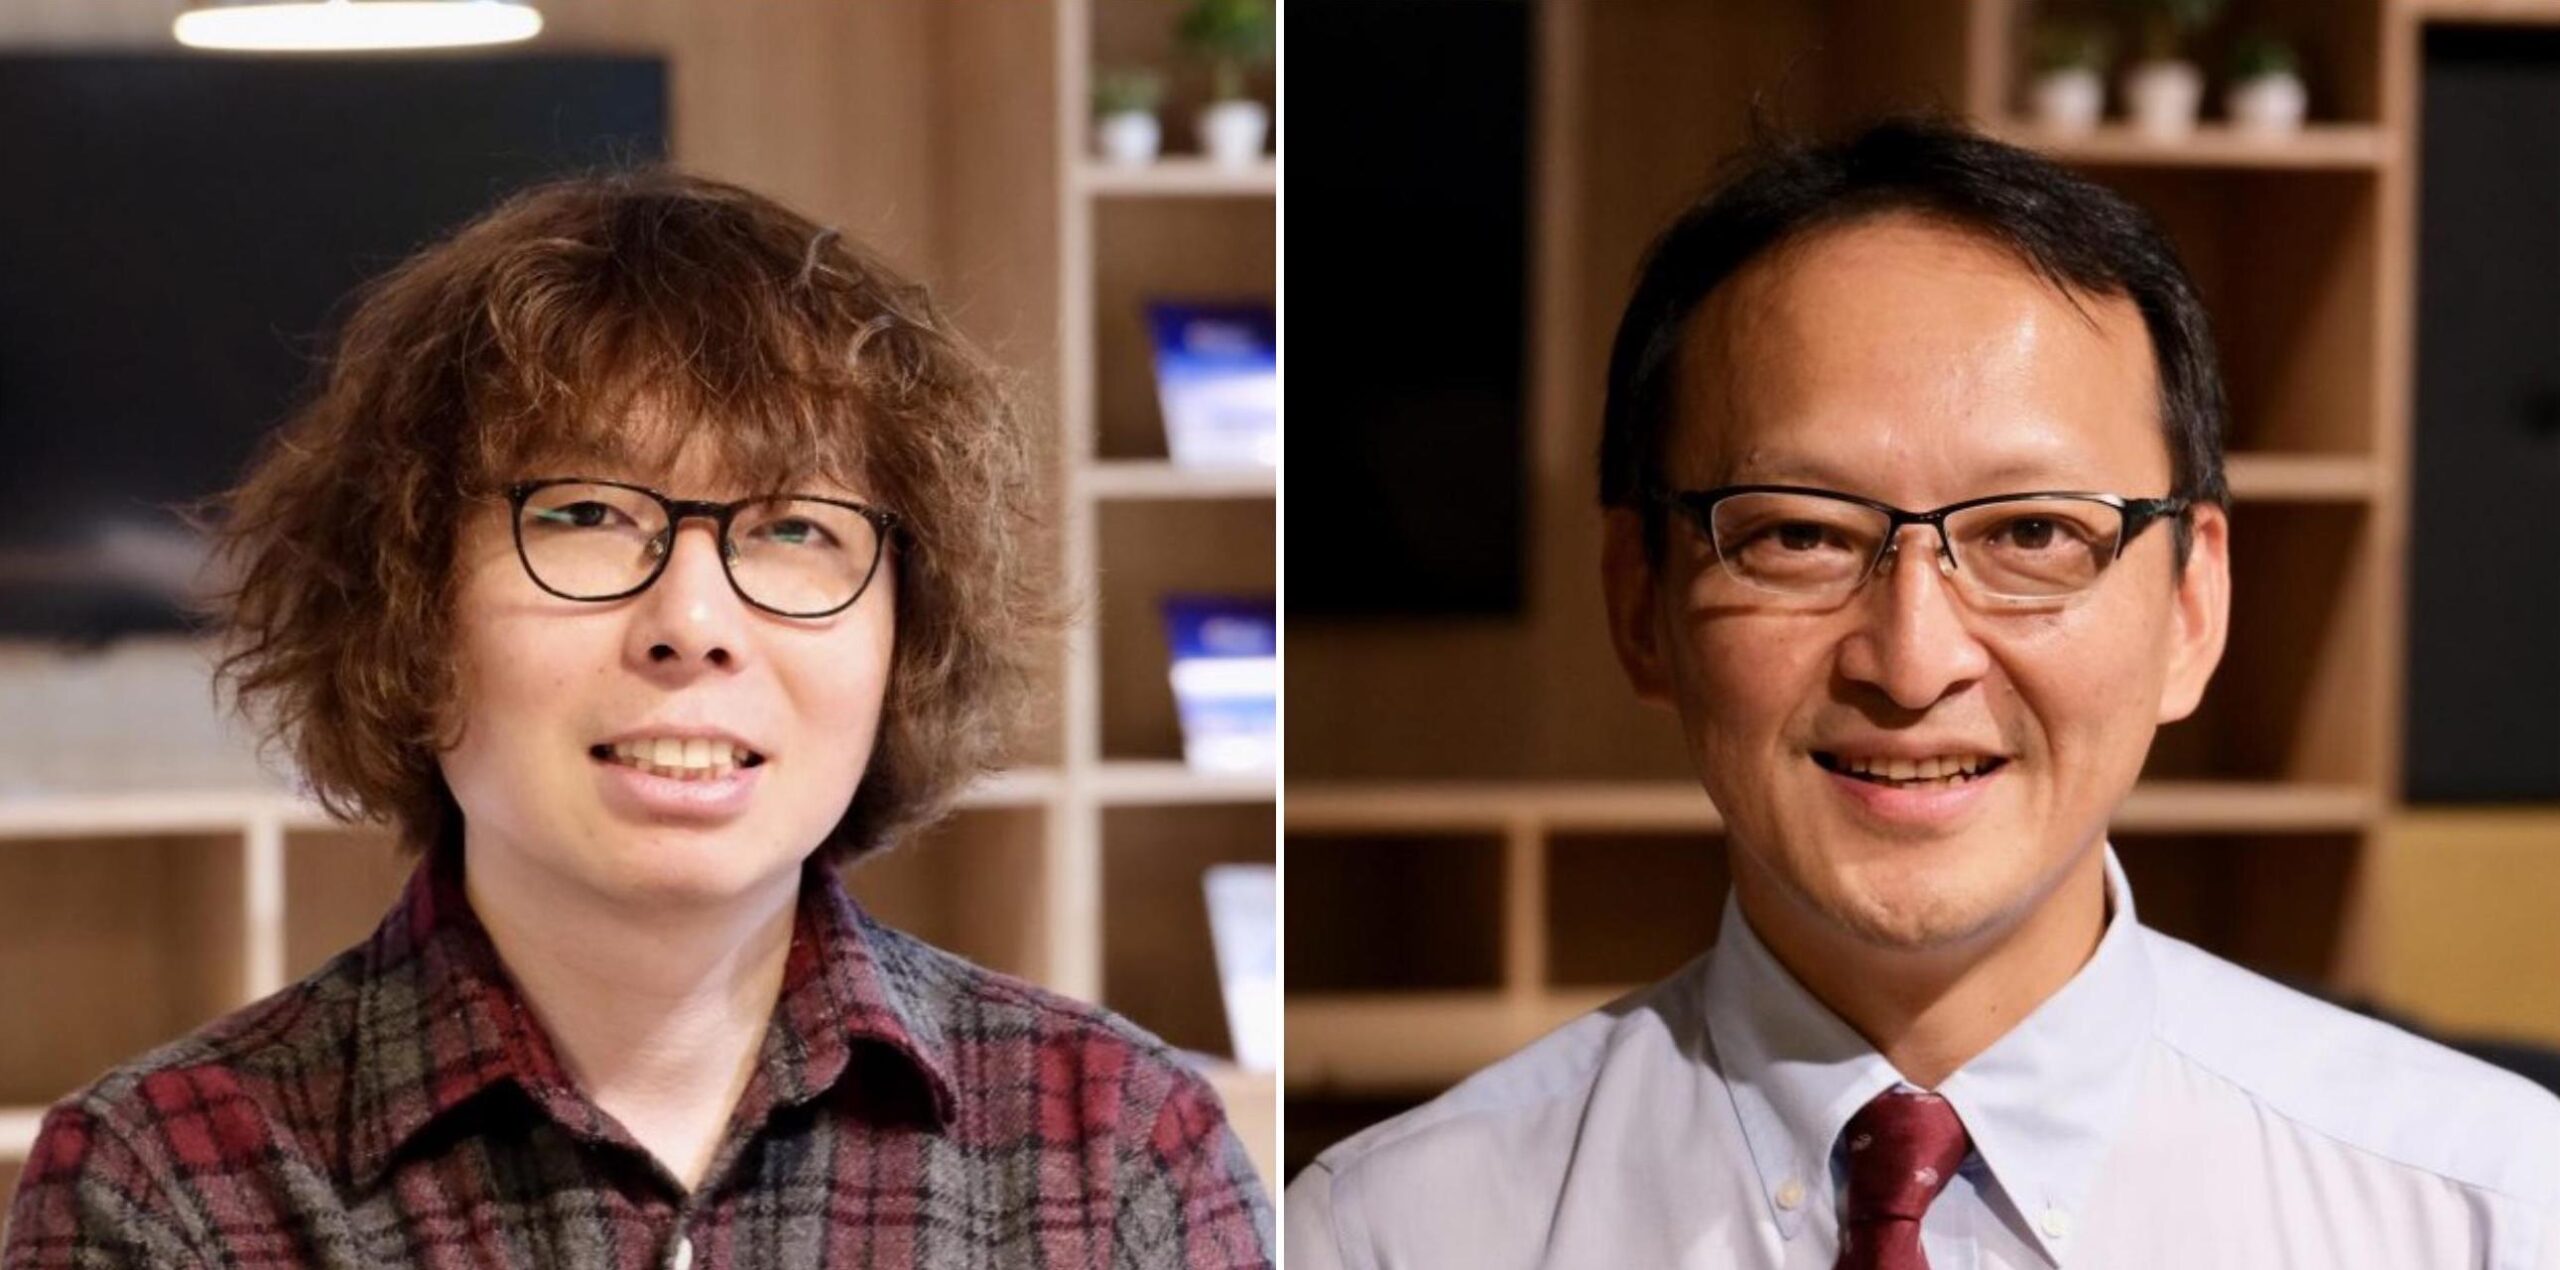 Lead author Satoshi Tanikawa (left) and corresponding author Shinya Tanaka (right) of the research team at Hokkaido University and the Institute for Chemical Reaction Design and Discovery (WPI-ICReDD). (Photo: WPI-ICReDD)